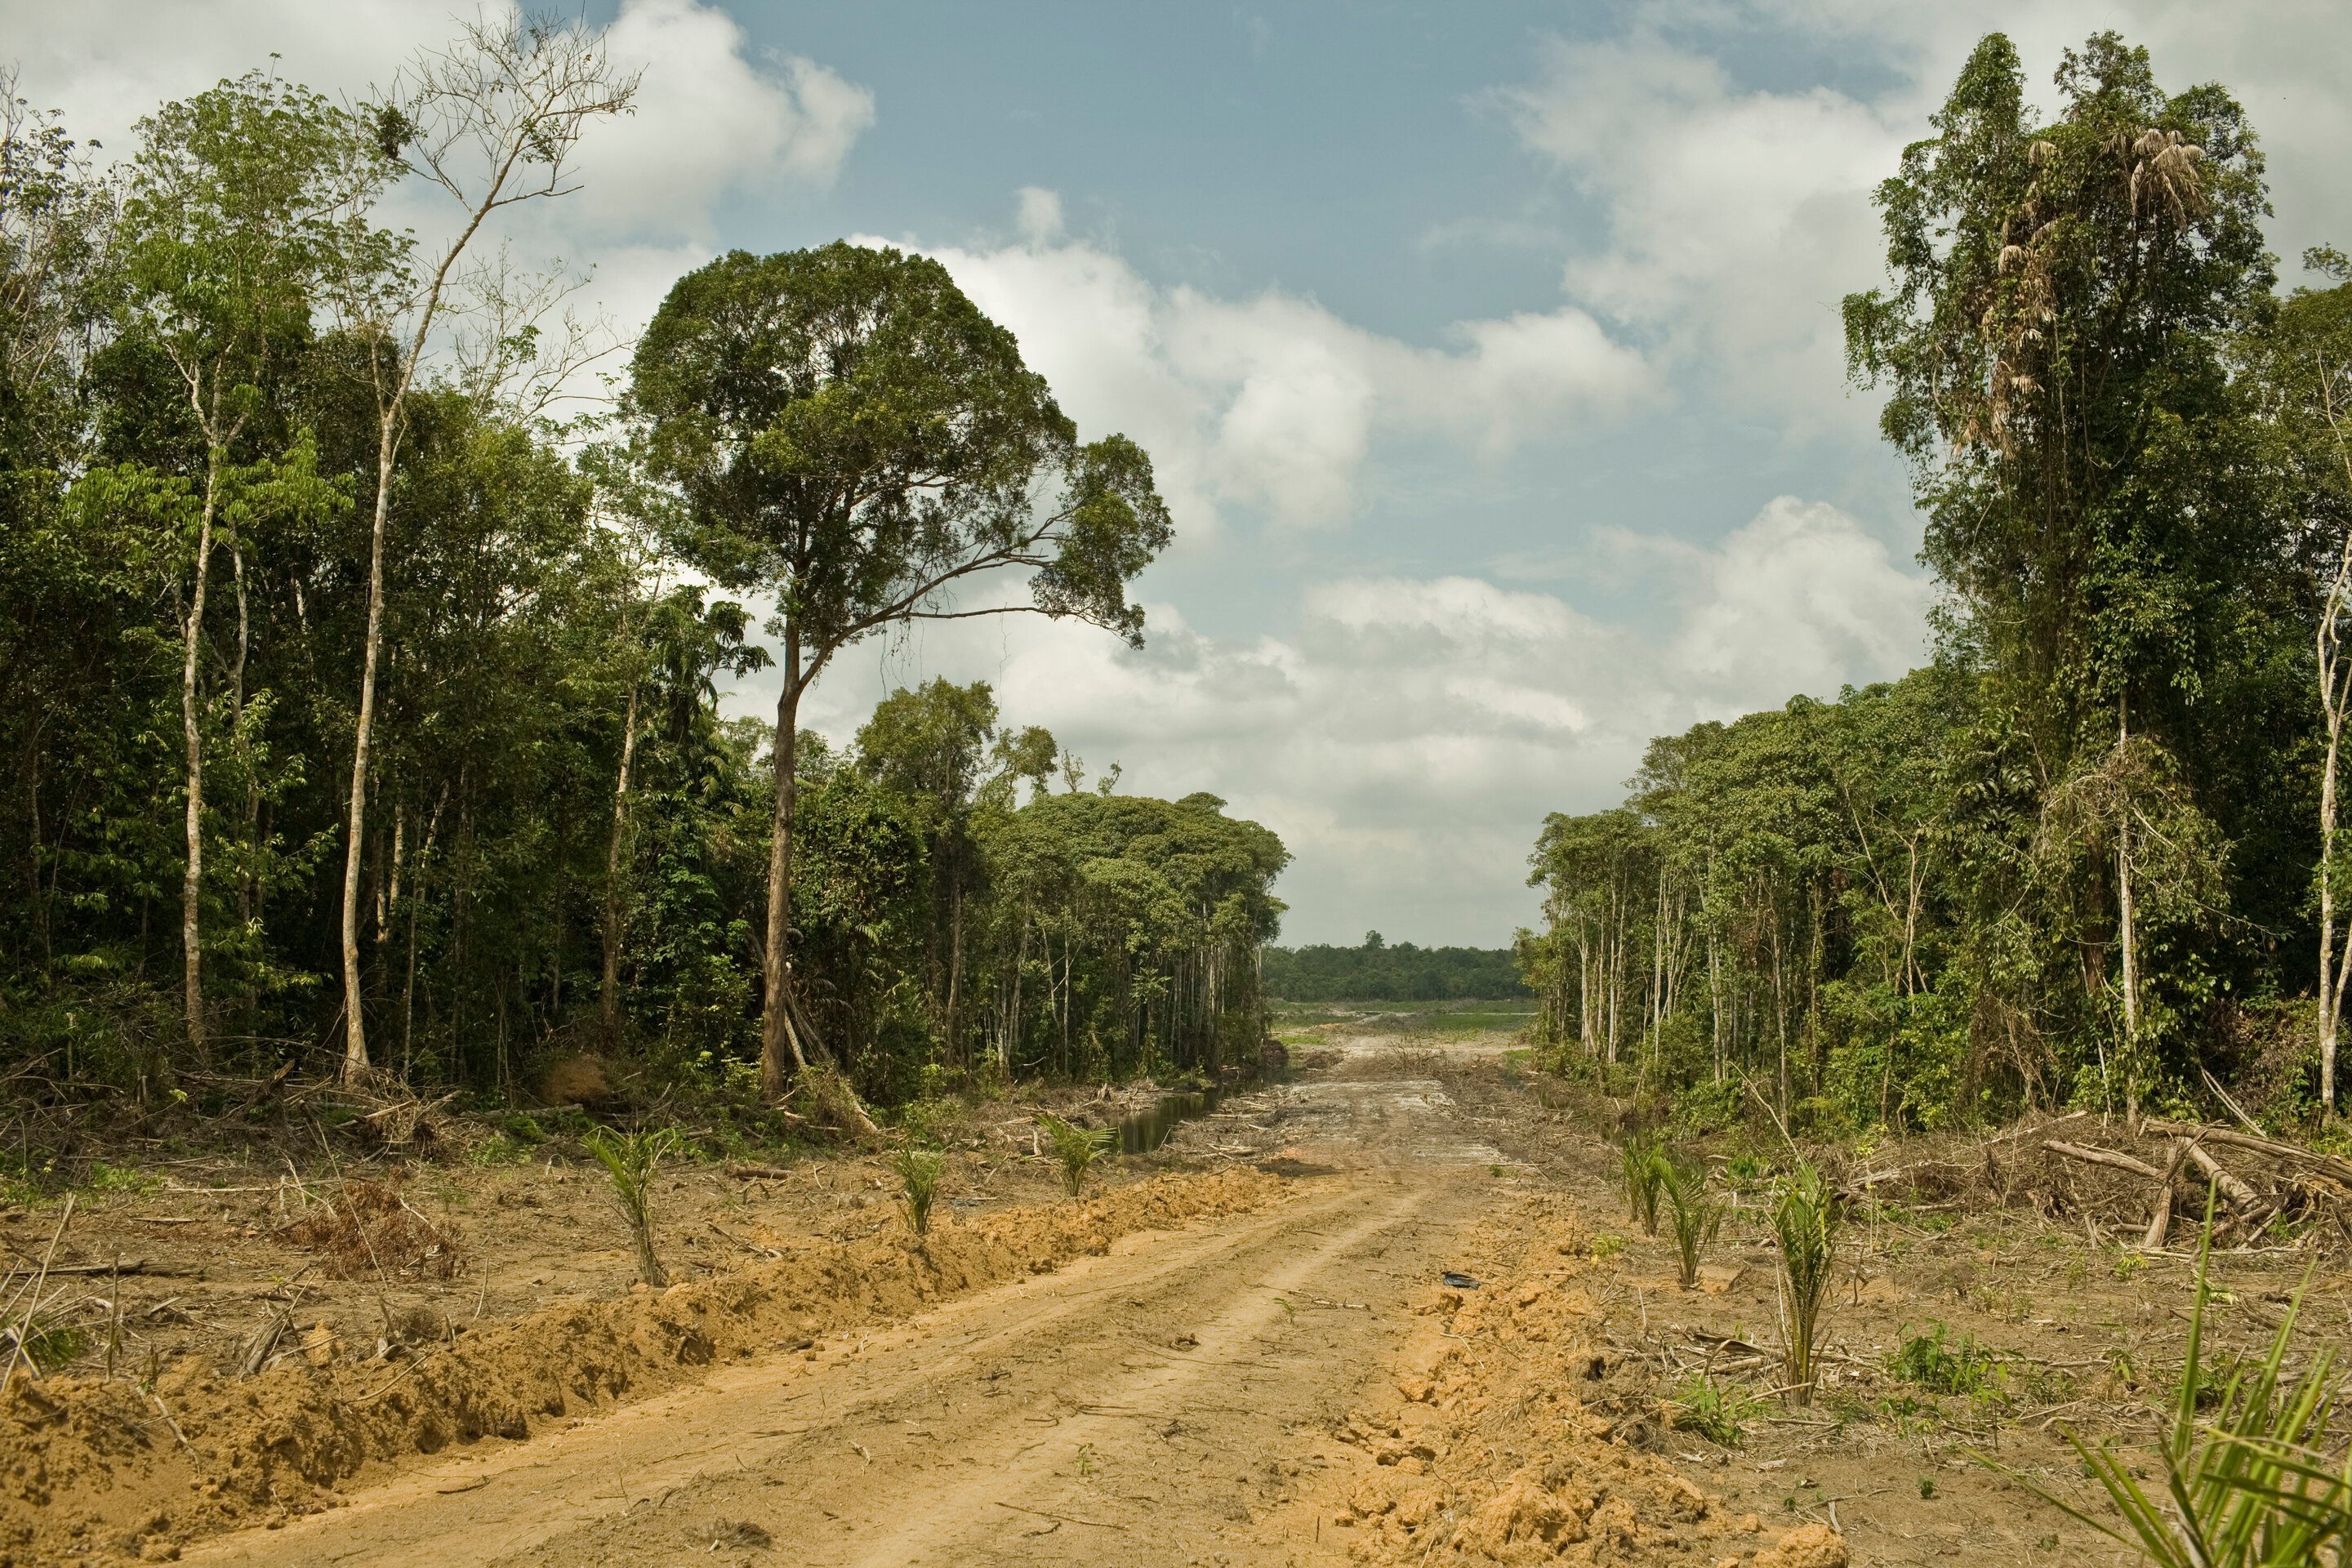 Carbon bomb Study says climate impact from loss of intact tropical forests grossly underreported